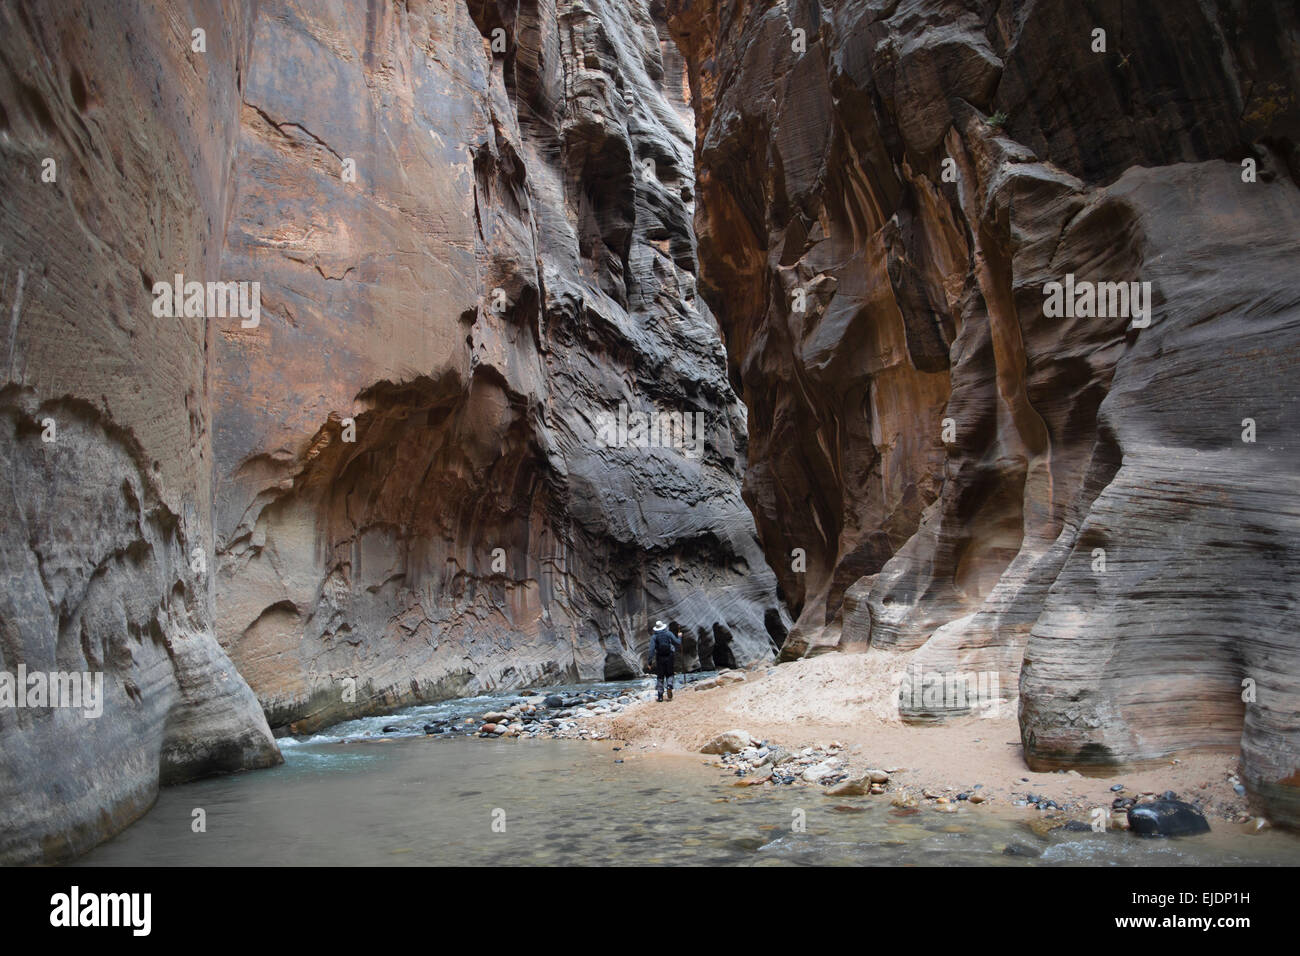 The Narrows in Zion National Park remains one of the most popular hikes. Stock Photo